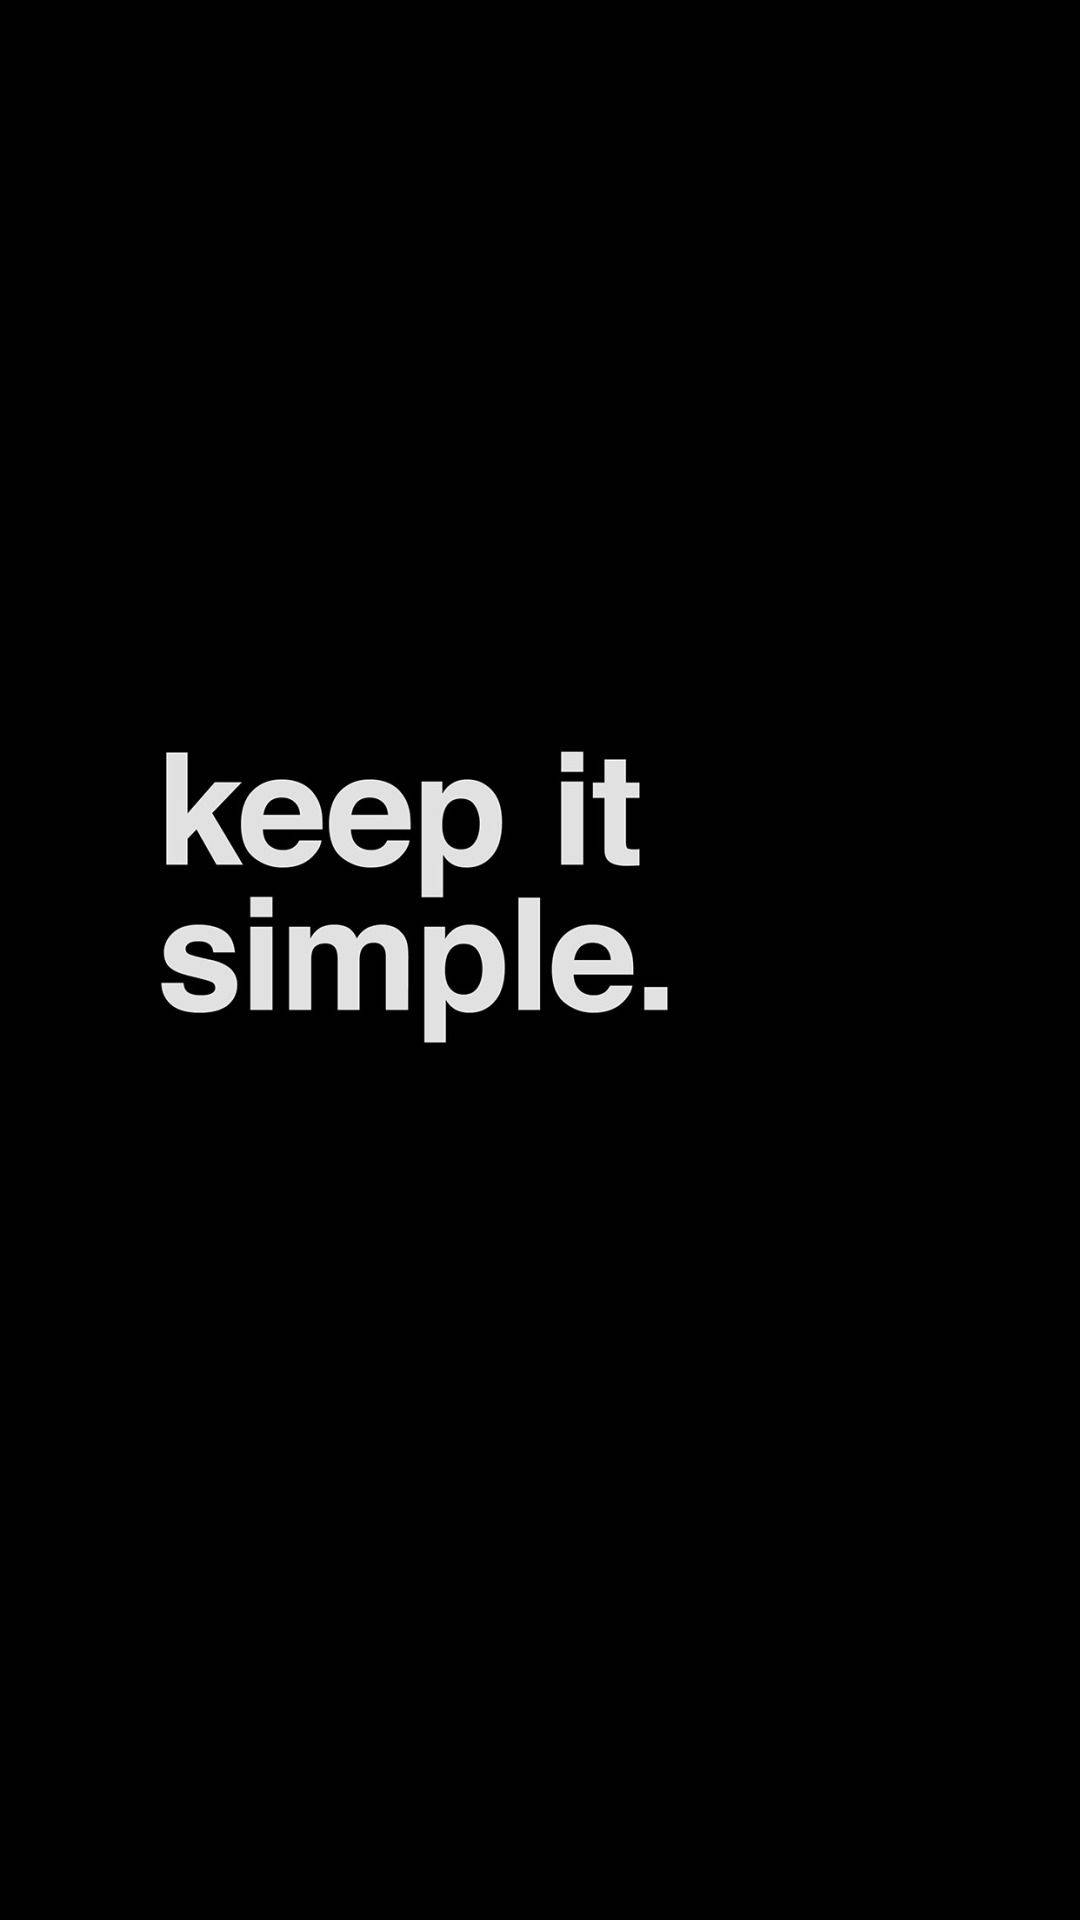 "Keep It Simple" Inspirational Black and White Quote. Wallpaper